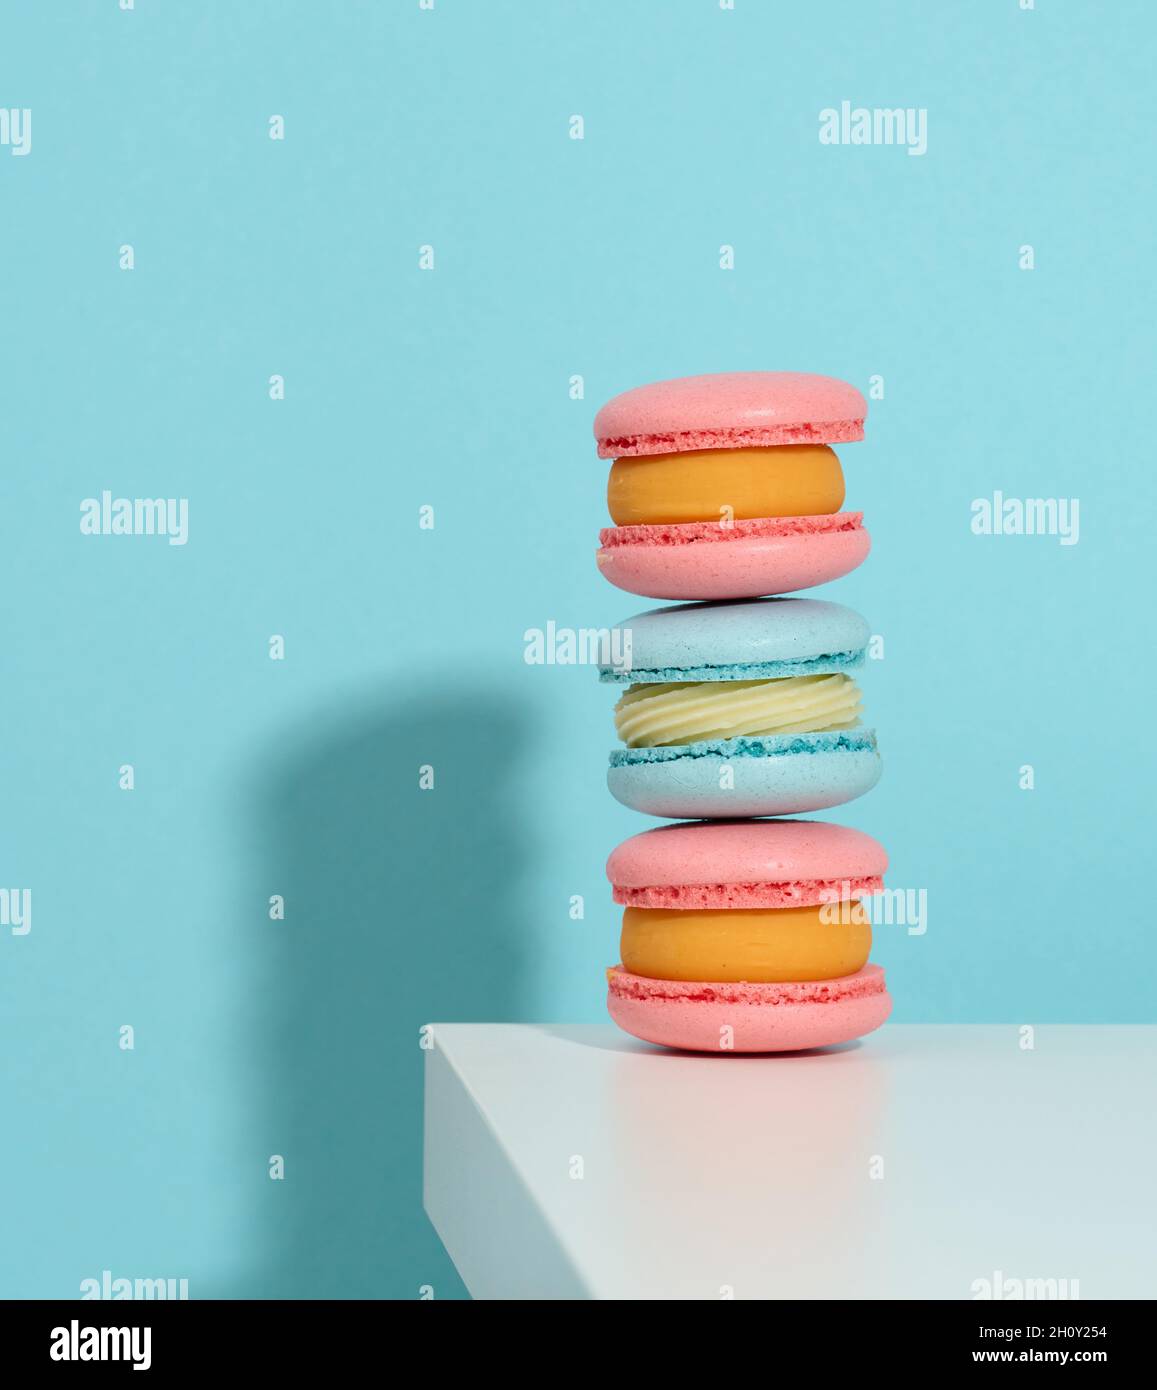 baked pinke round macarons on a blue background, delicious dessert Stock Photo